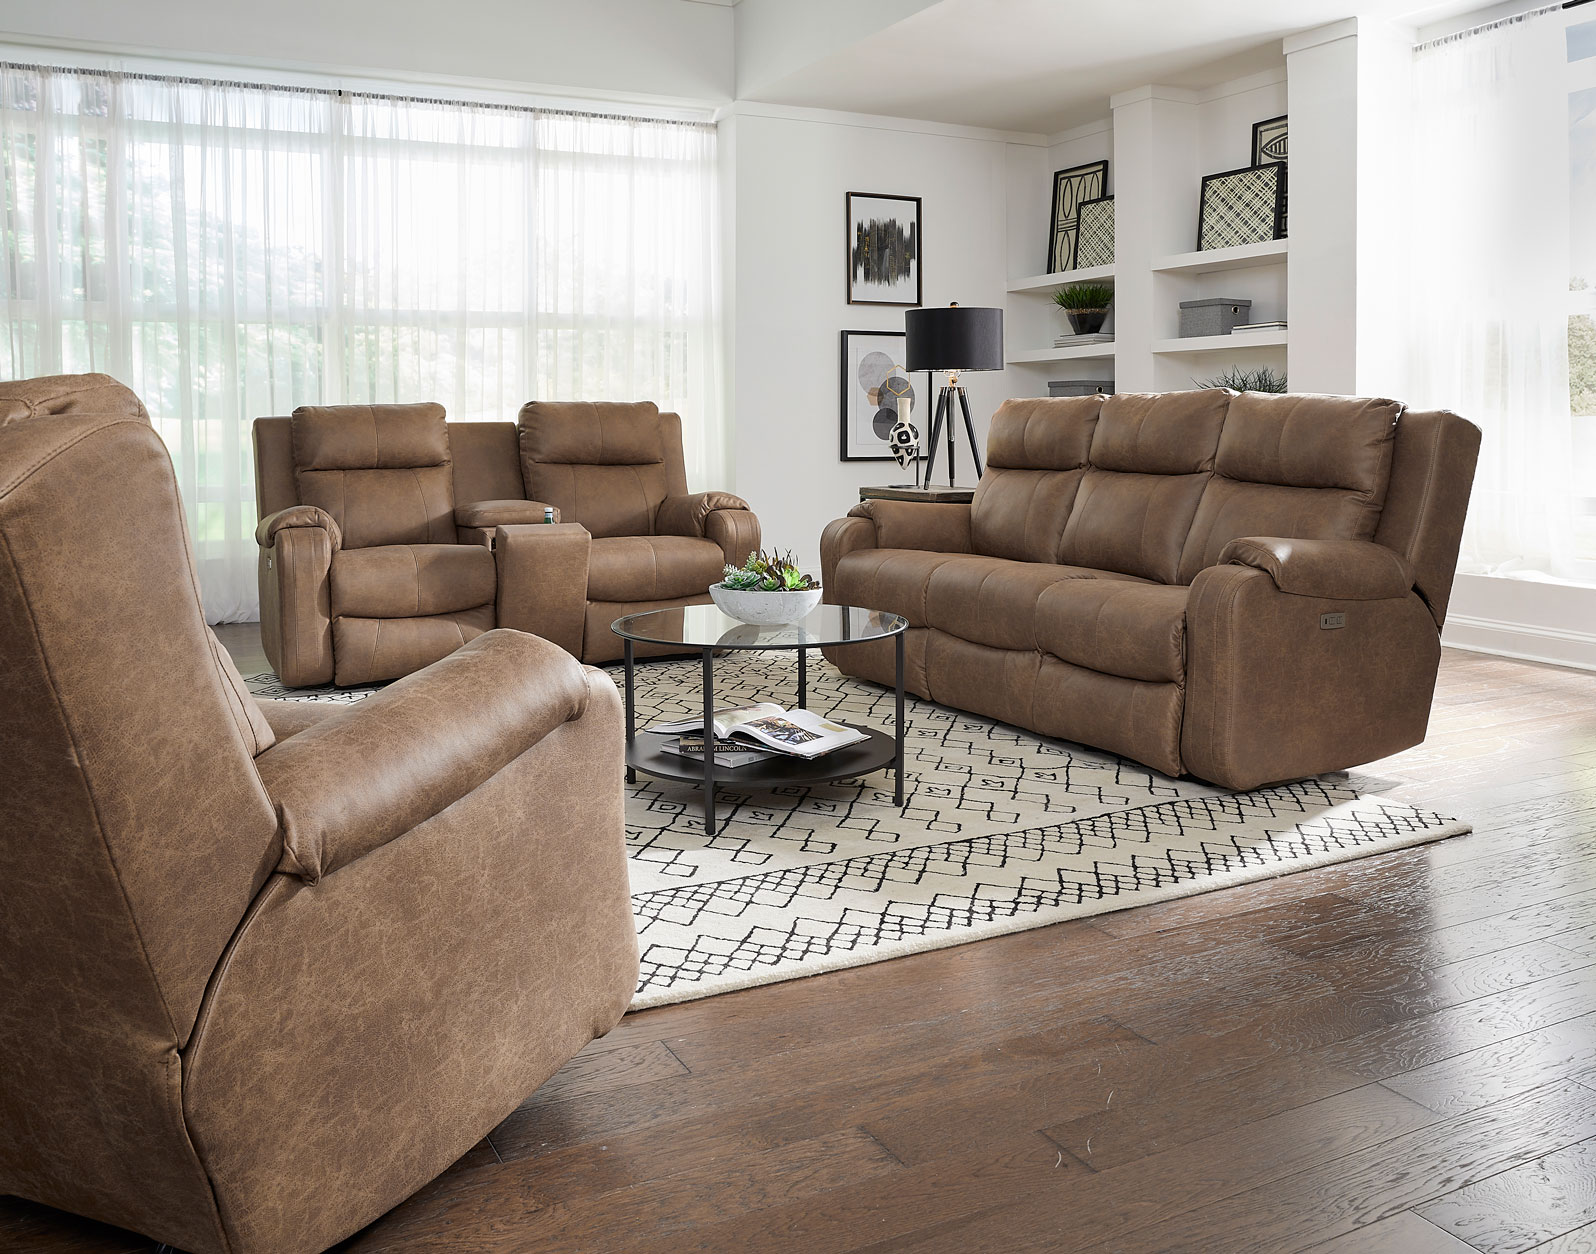 Picture of FURY BROWN POWER RECLINING LOVESEAT WITH CONSOLE